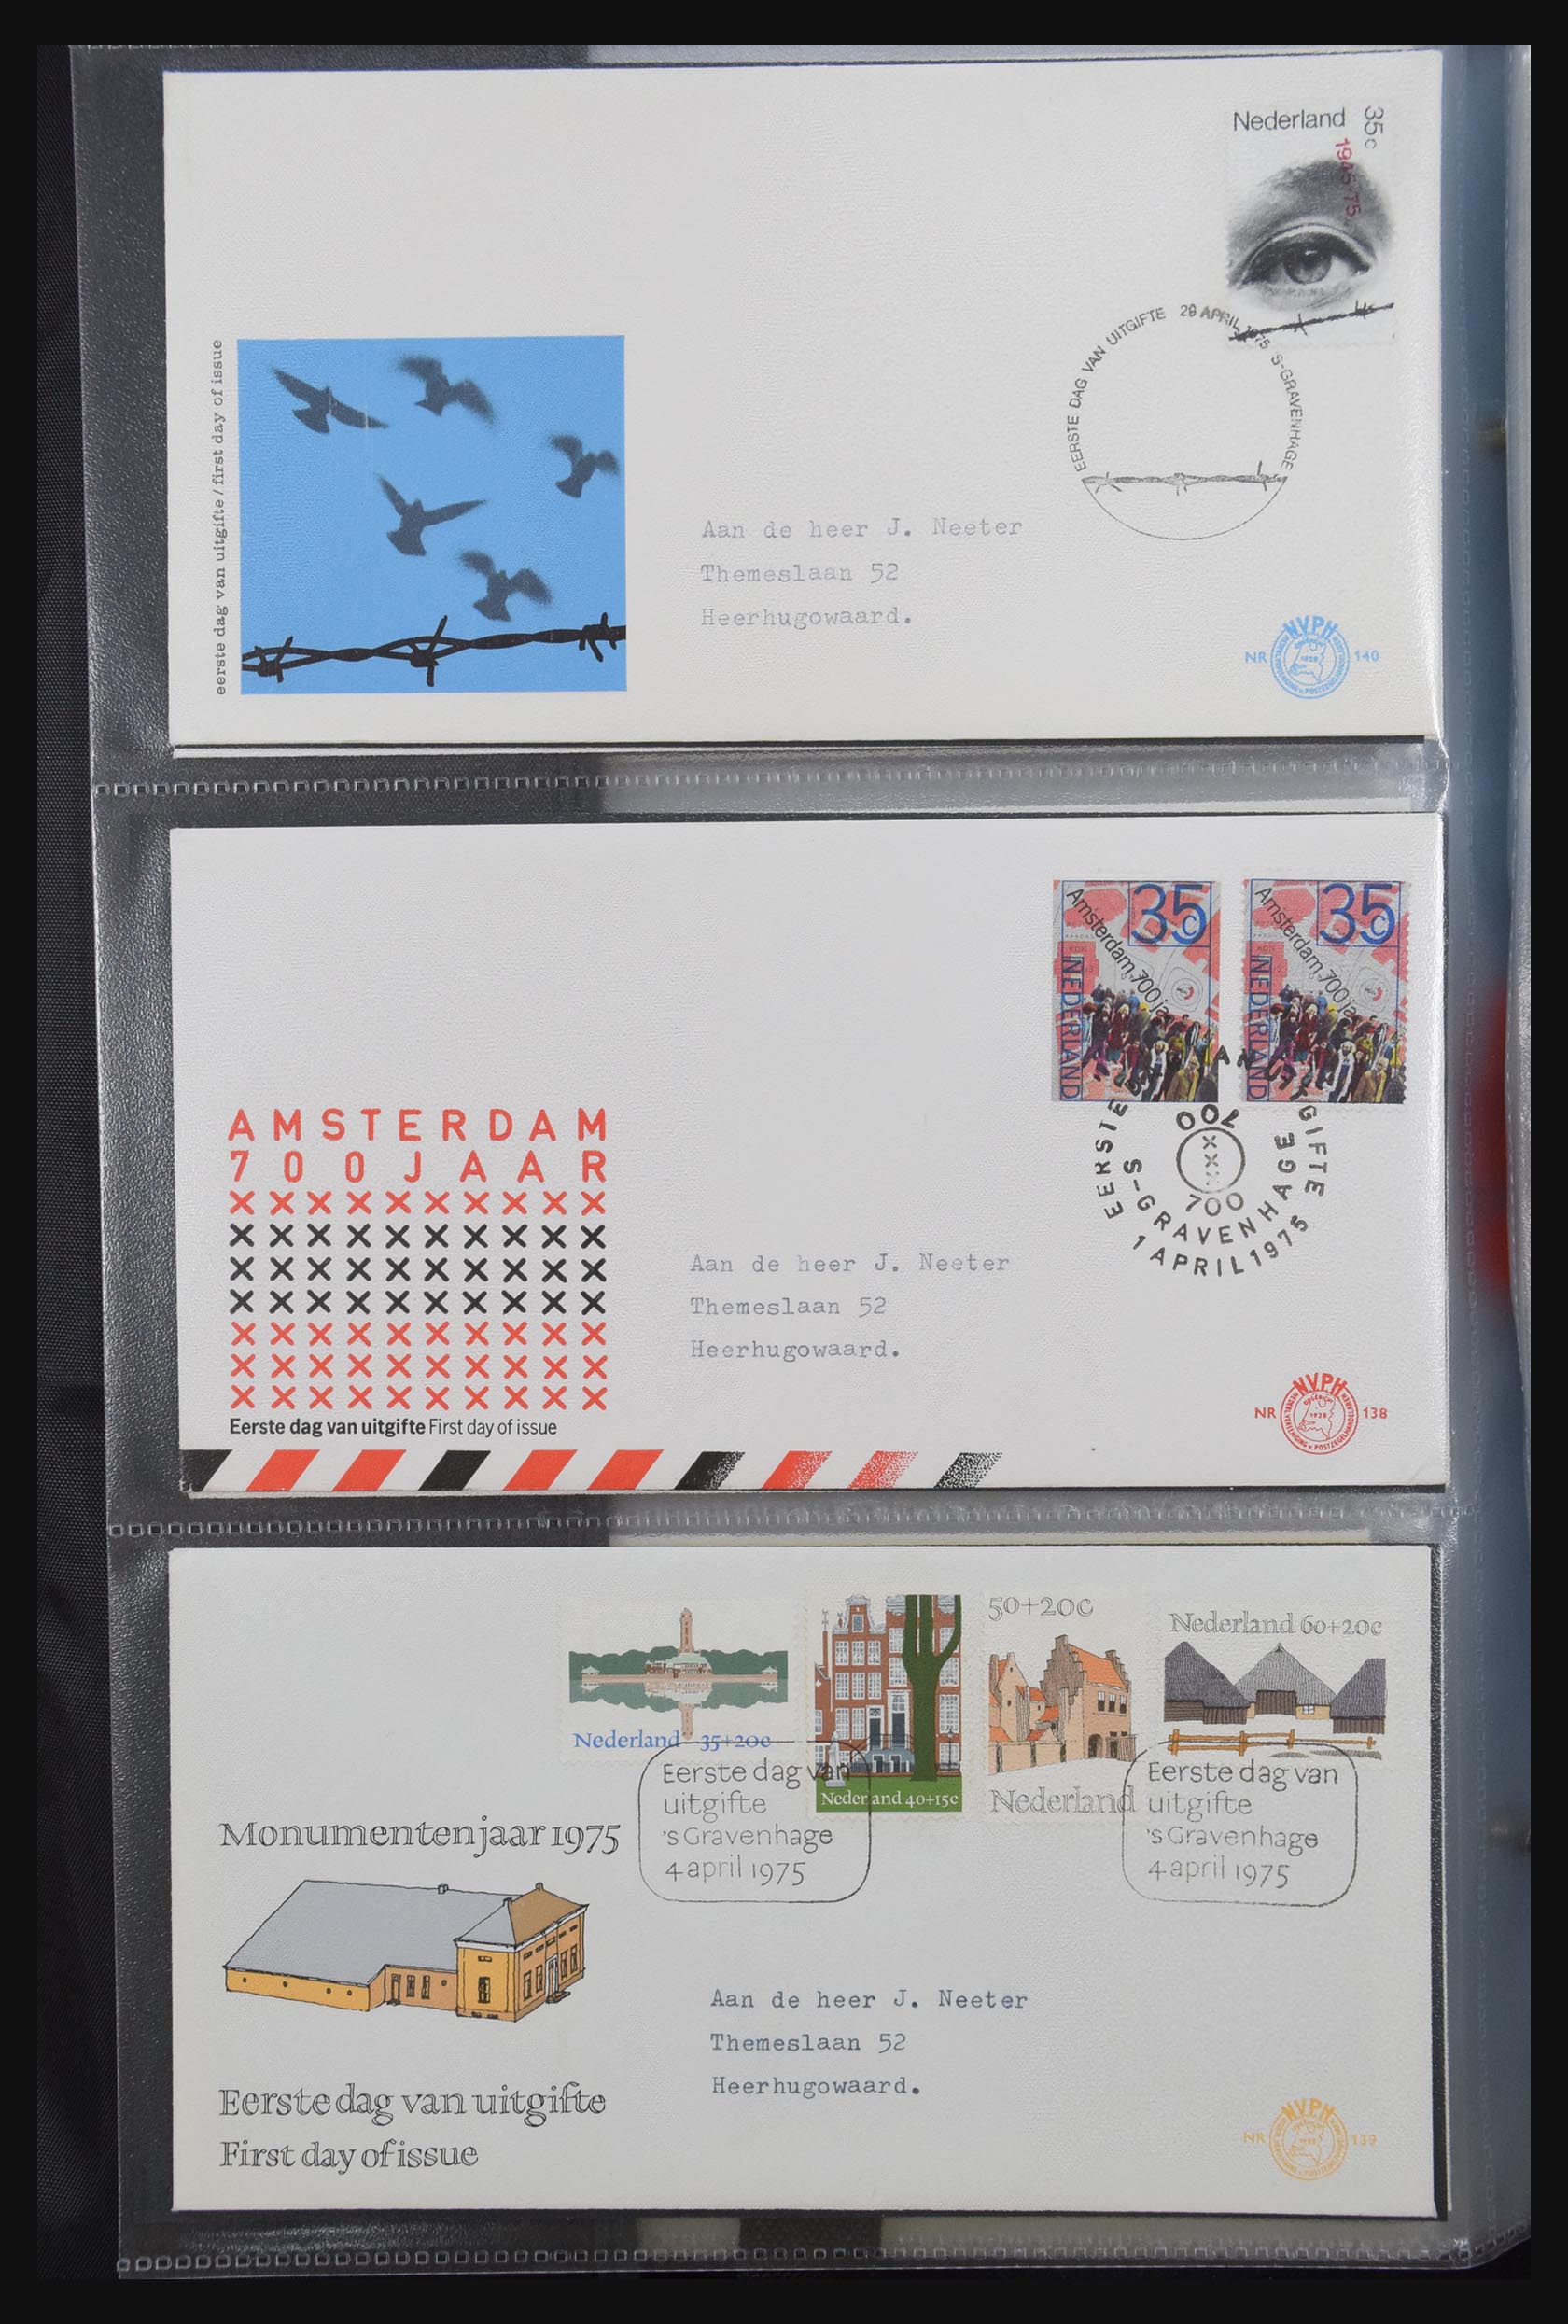 31301 048 - 31301 Netherlands FDC's 1950-2006.